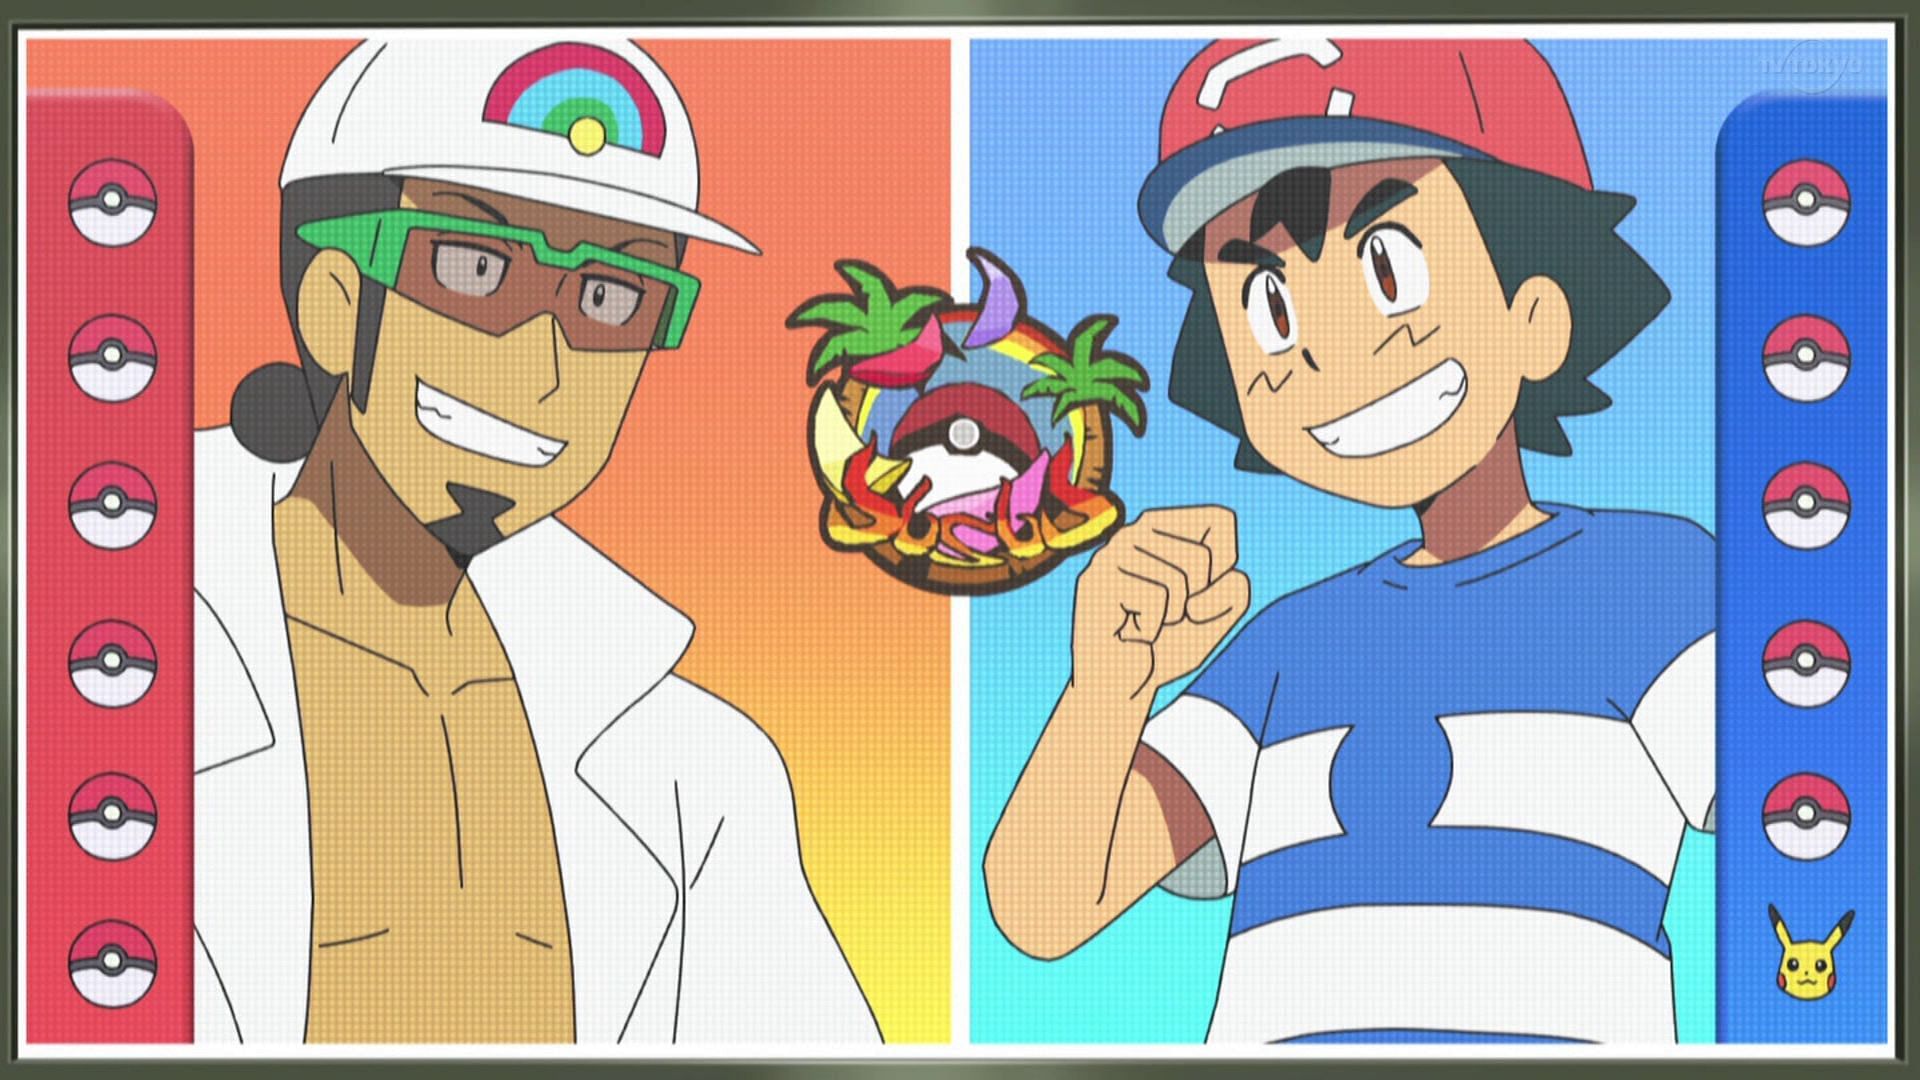 Ash defeated Kukui in order to become the Alolan Champion (Image credit: OLM Incorporated, Pokemon: Sun and Moon)